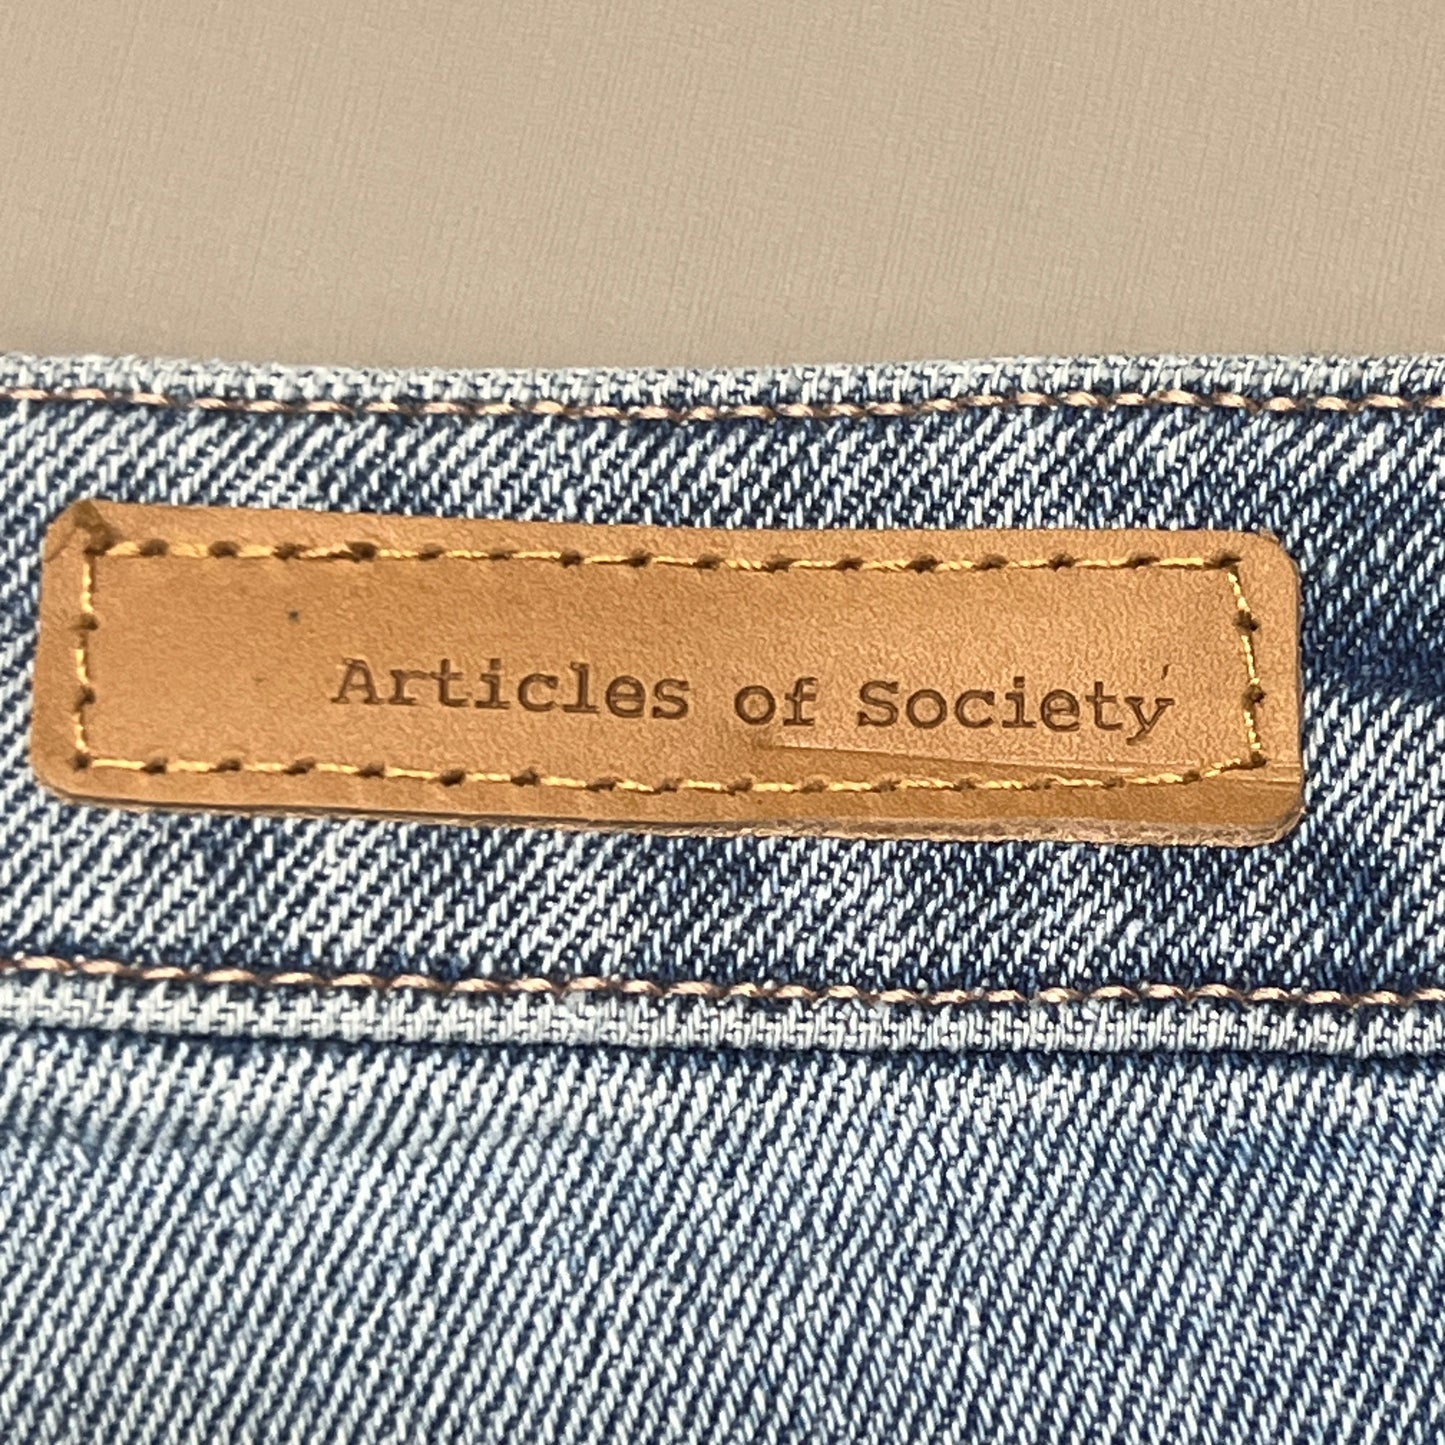 ARTICLES OF SOCIETY Orchidland Ripped Denim Jeans Women's Sz 27 Blue 4009TQ3-717 (New)